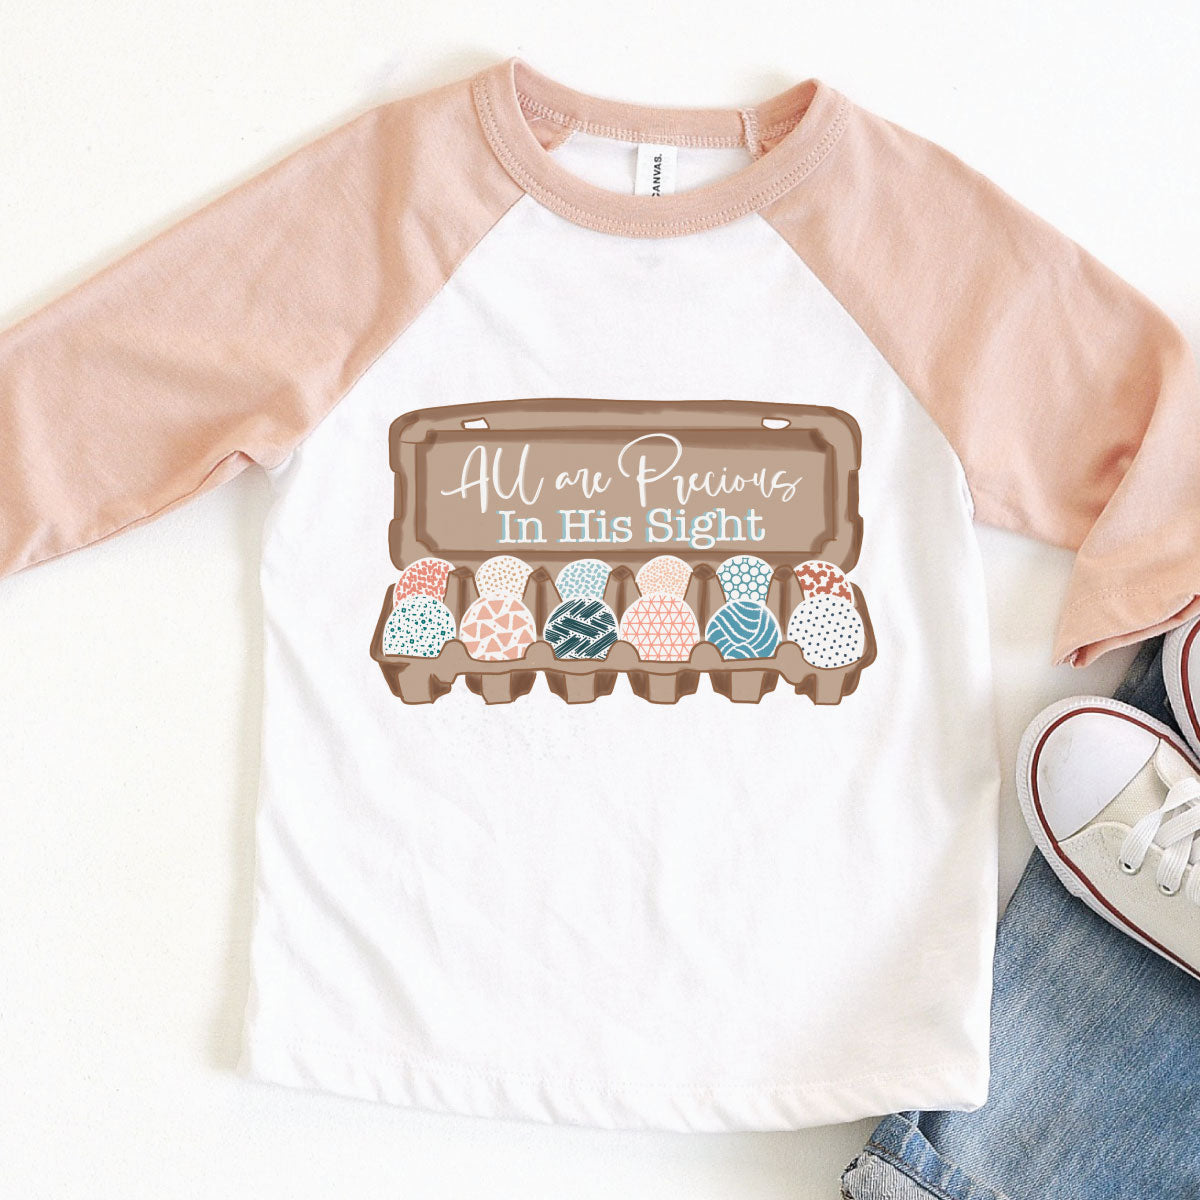 White with Peach Sleeves Raglan Shirt. Graphic is a carton of Easter eggs all with a different patterned designed and on the lid of the open carton read All are precious in his sight.